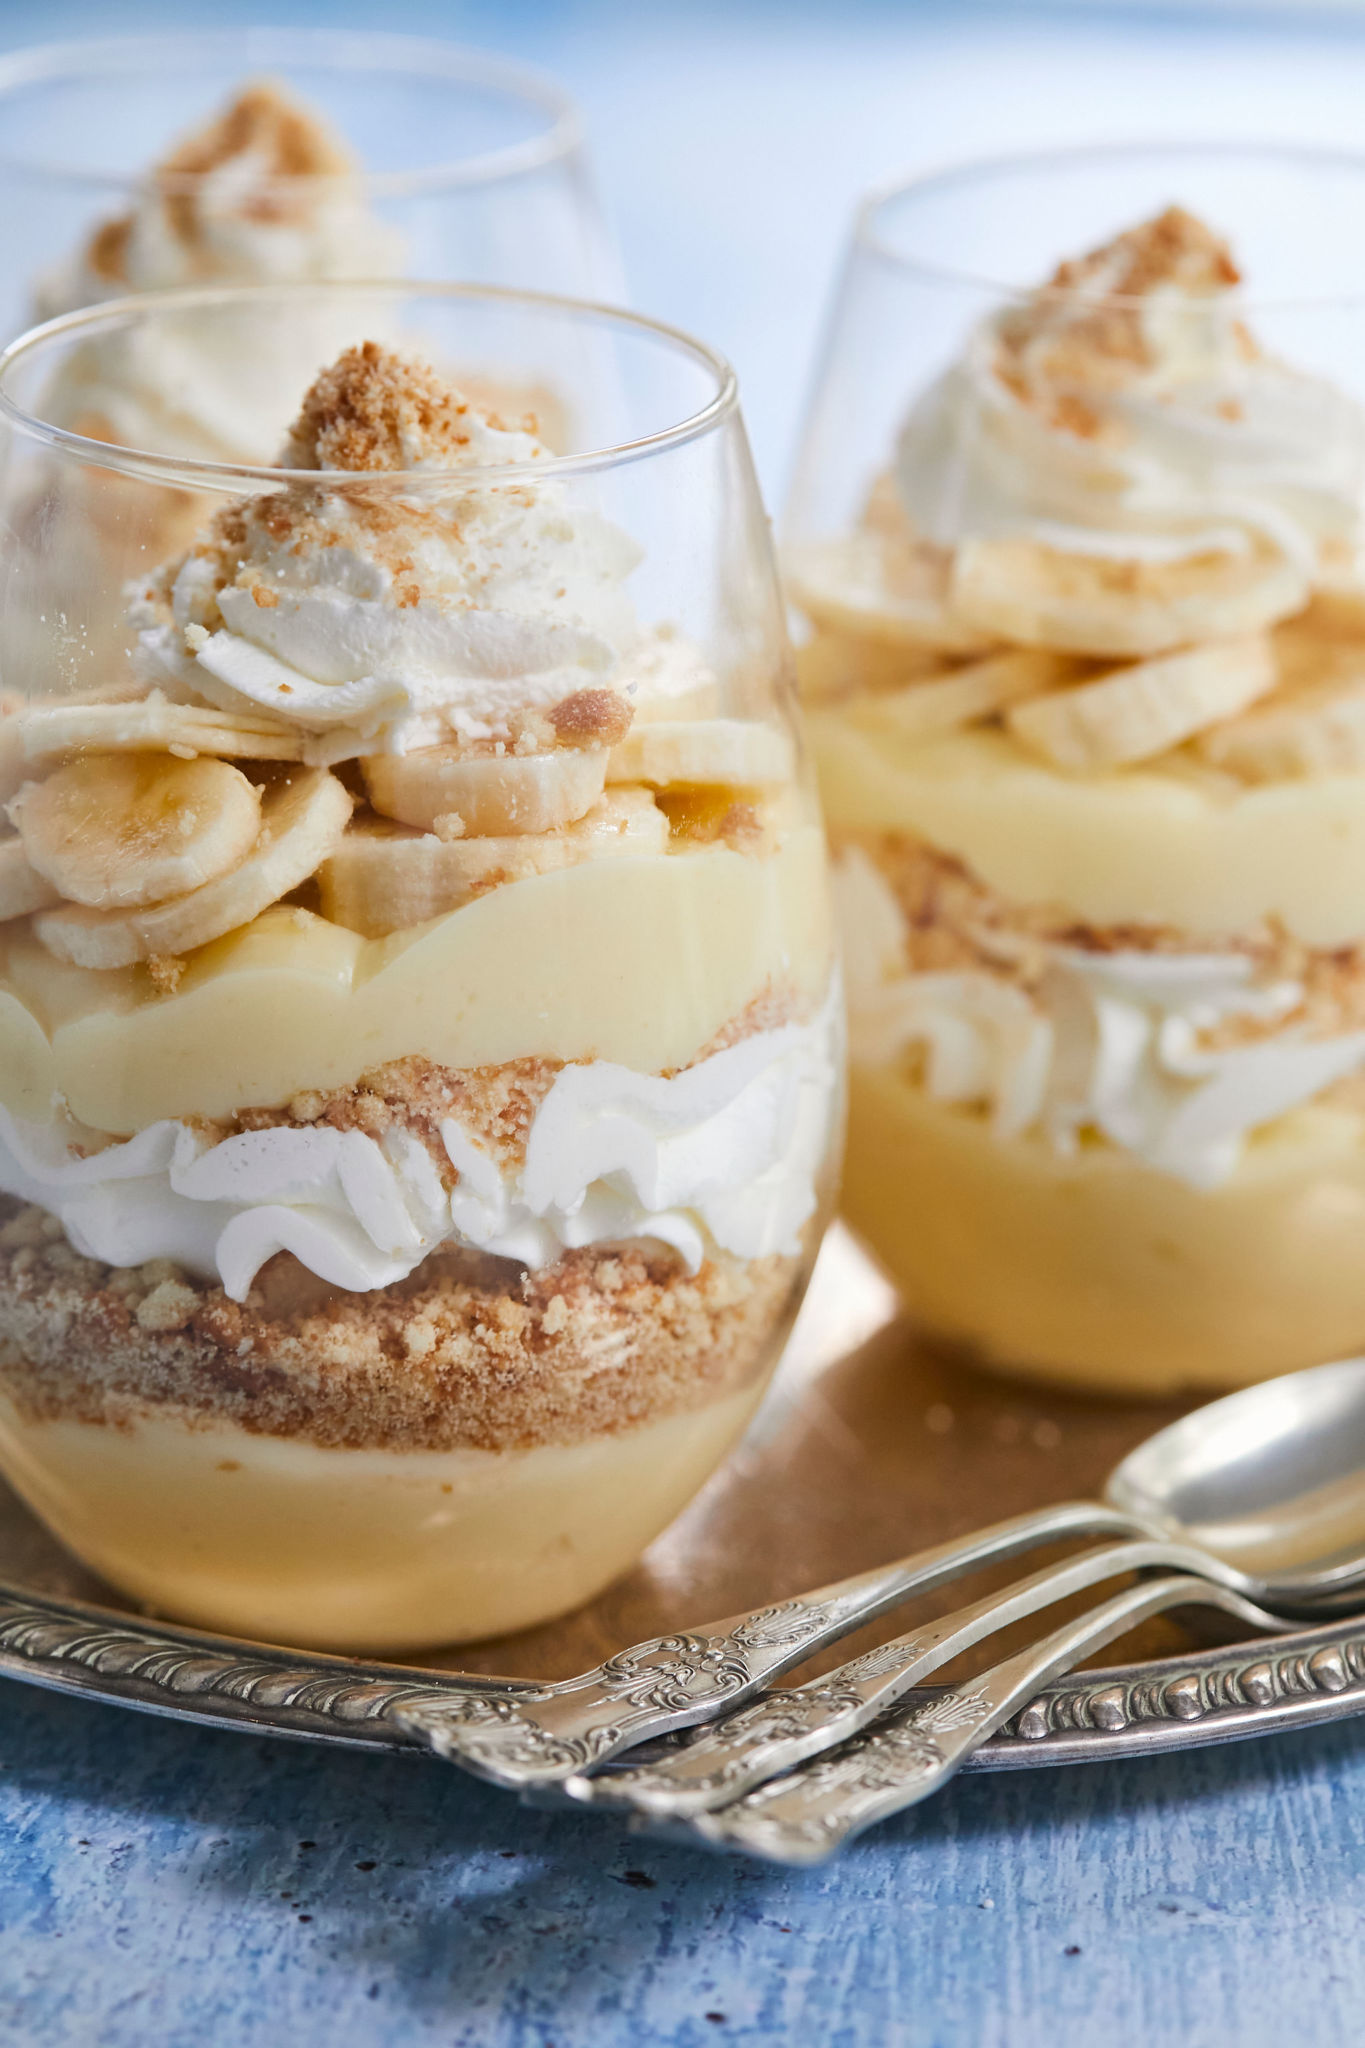 The side-view of my perfect creamy banana pudding recipe, showing all of the decadent layers.